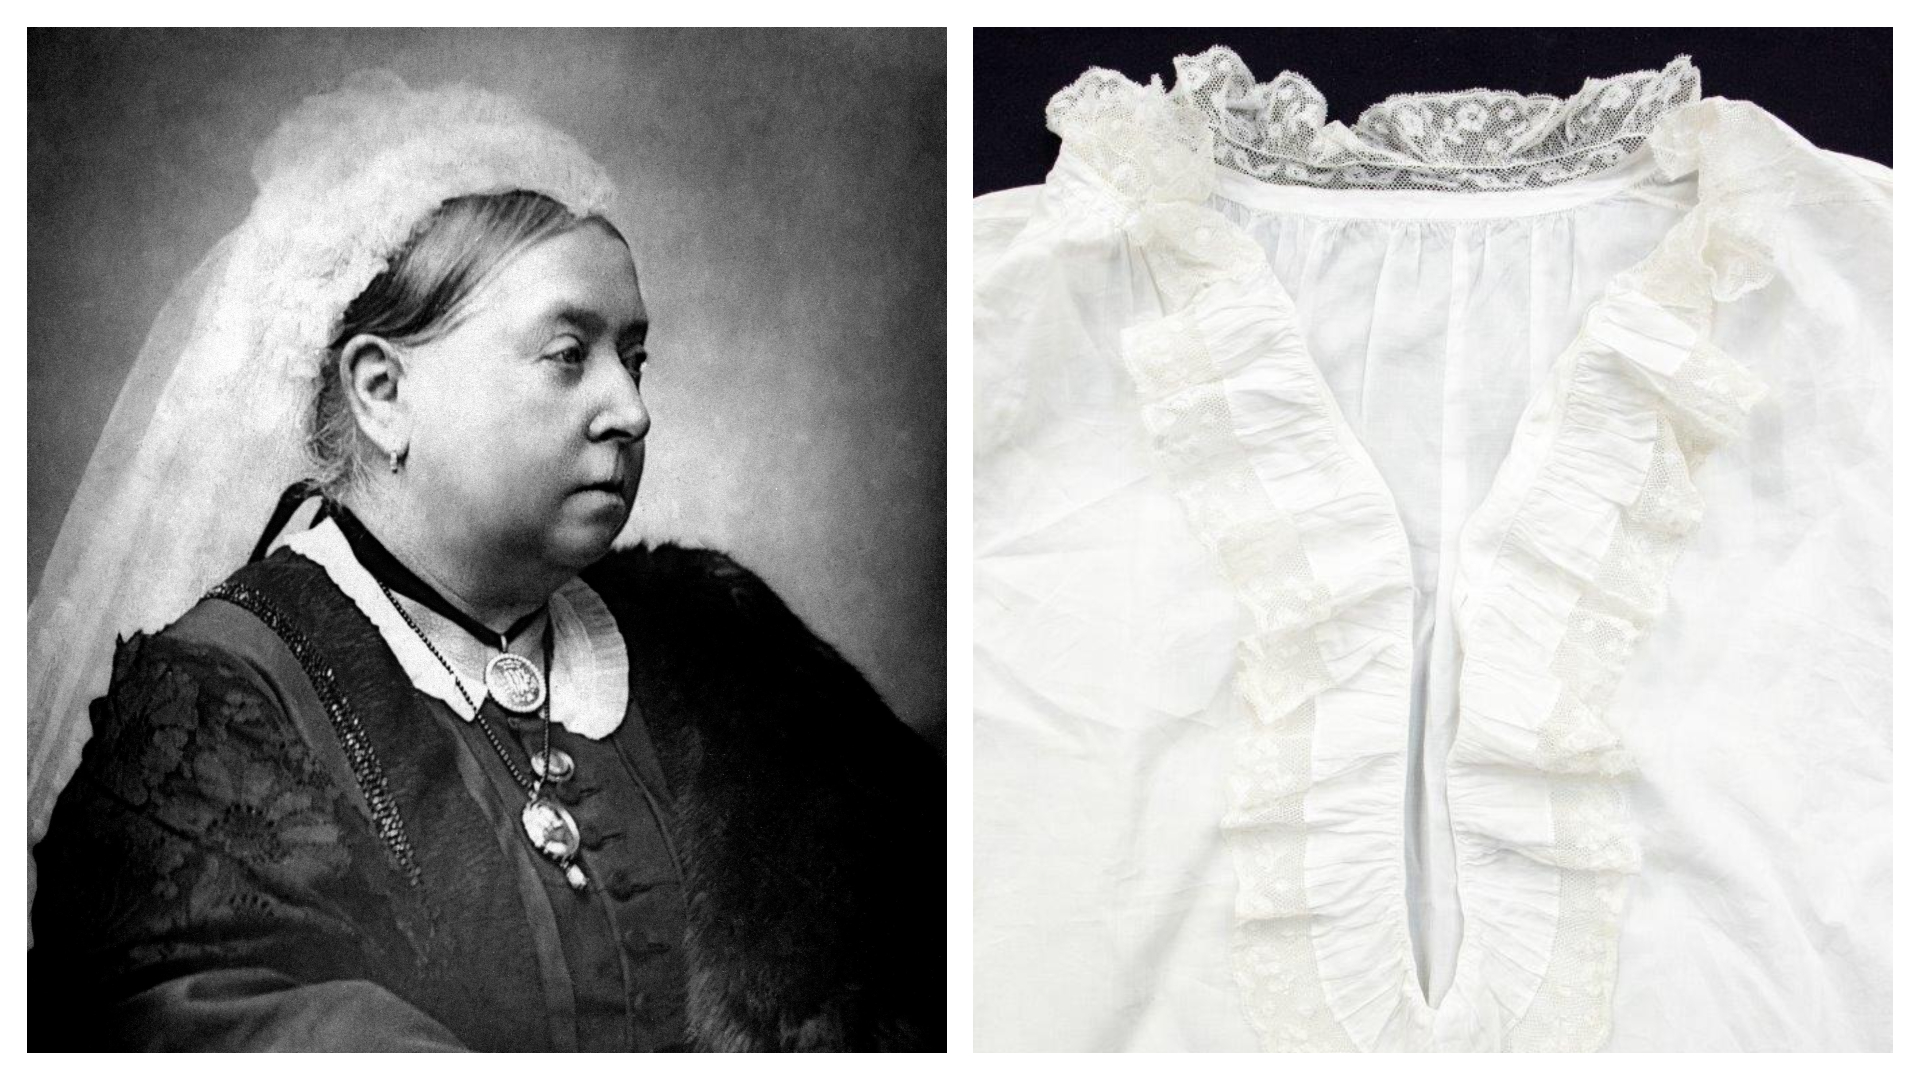 Pants? Queen Victoria's underwear sold for £12,000 at auction